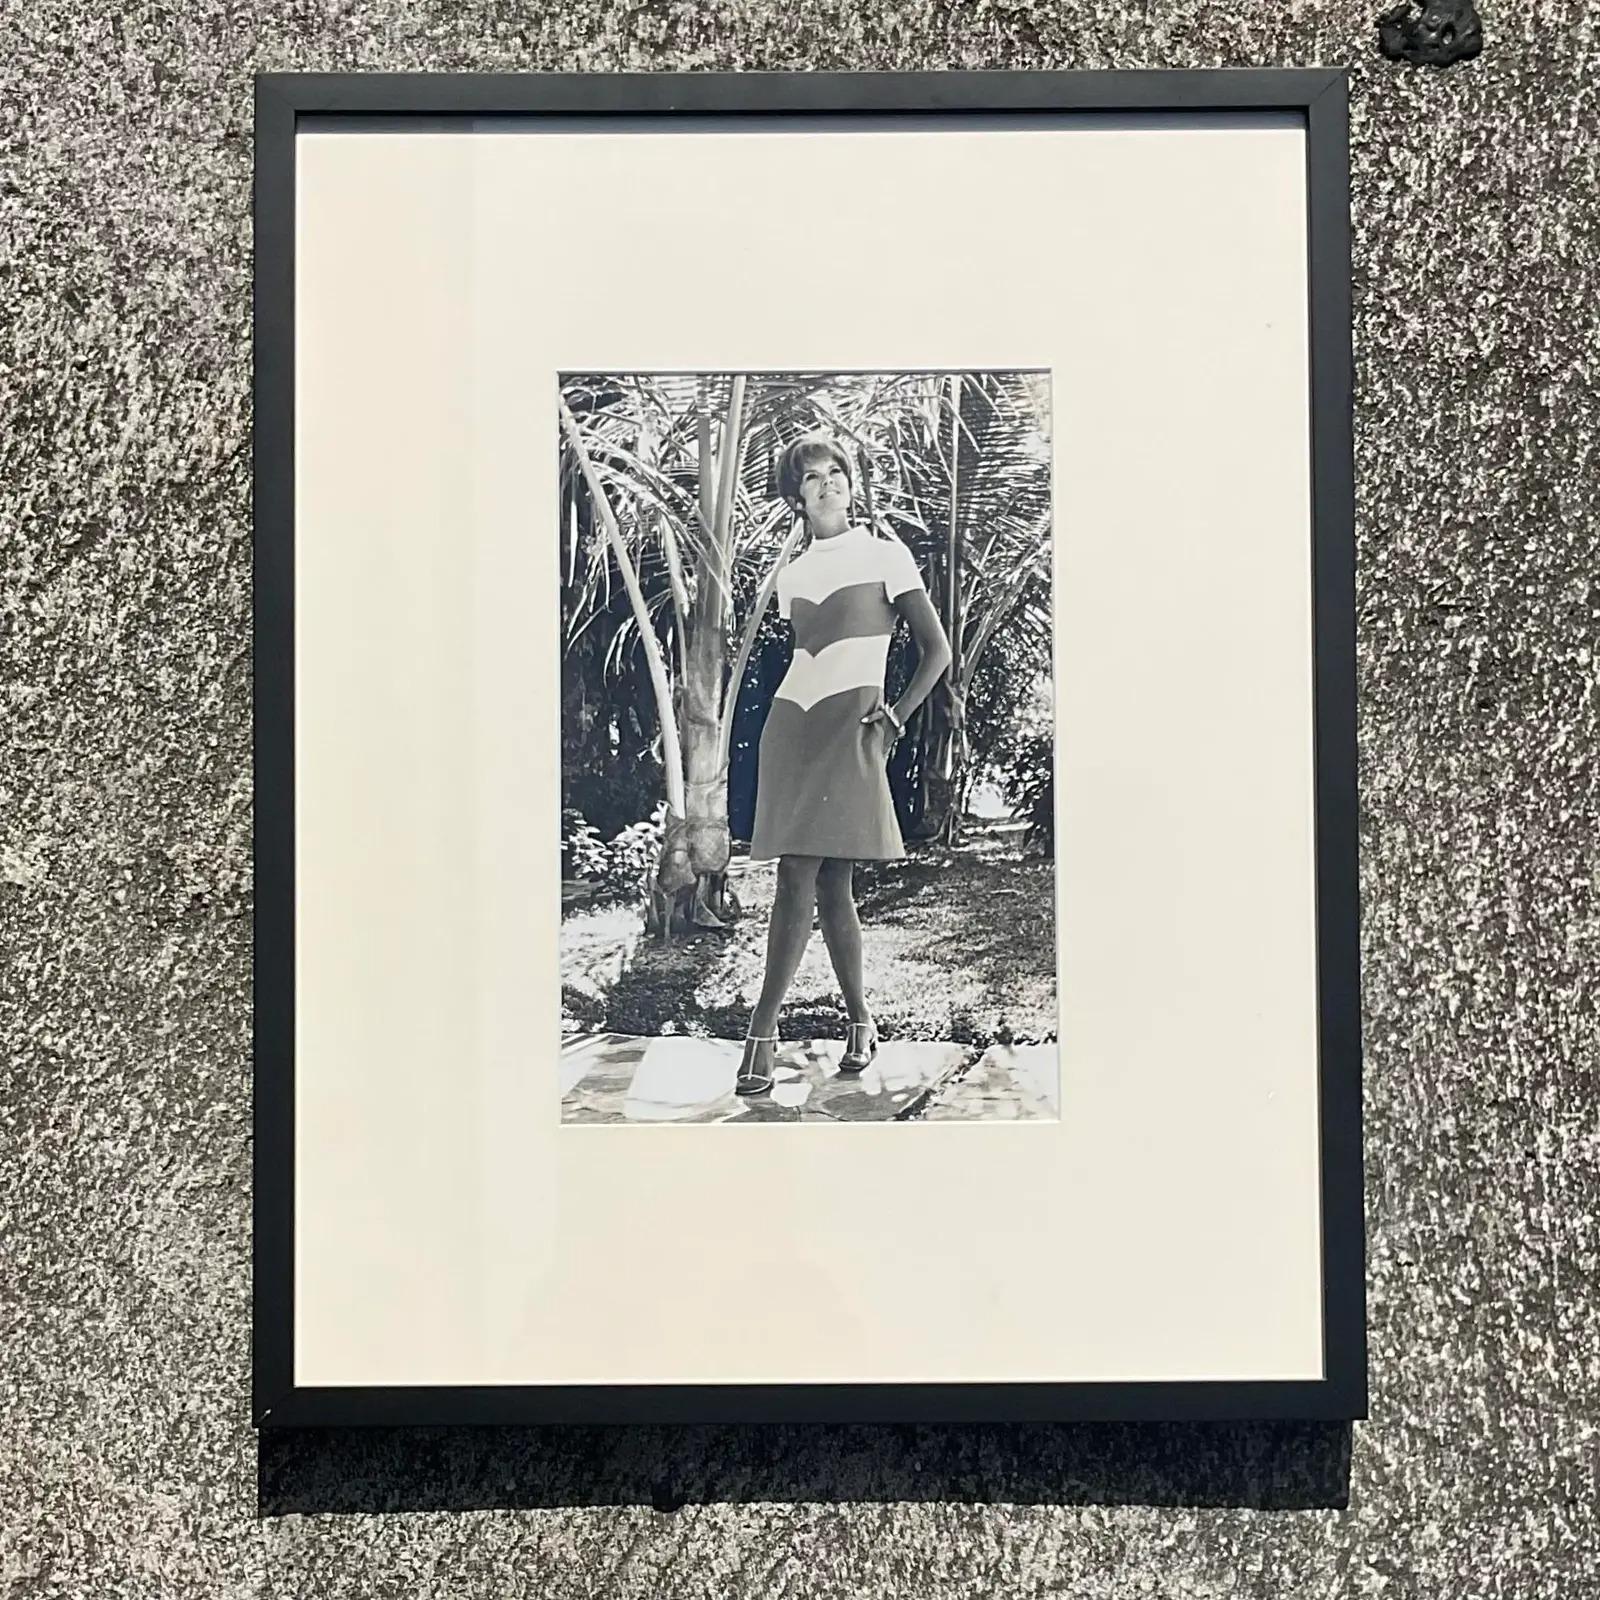 A fantastic vintage 1970s black and white photograph. A chic fashion shot with a tropical look. Newly framed with a clean and simple black frame. Acquired from a Palm Beach estate.